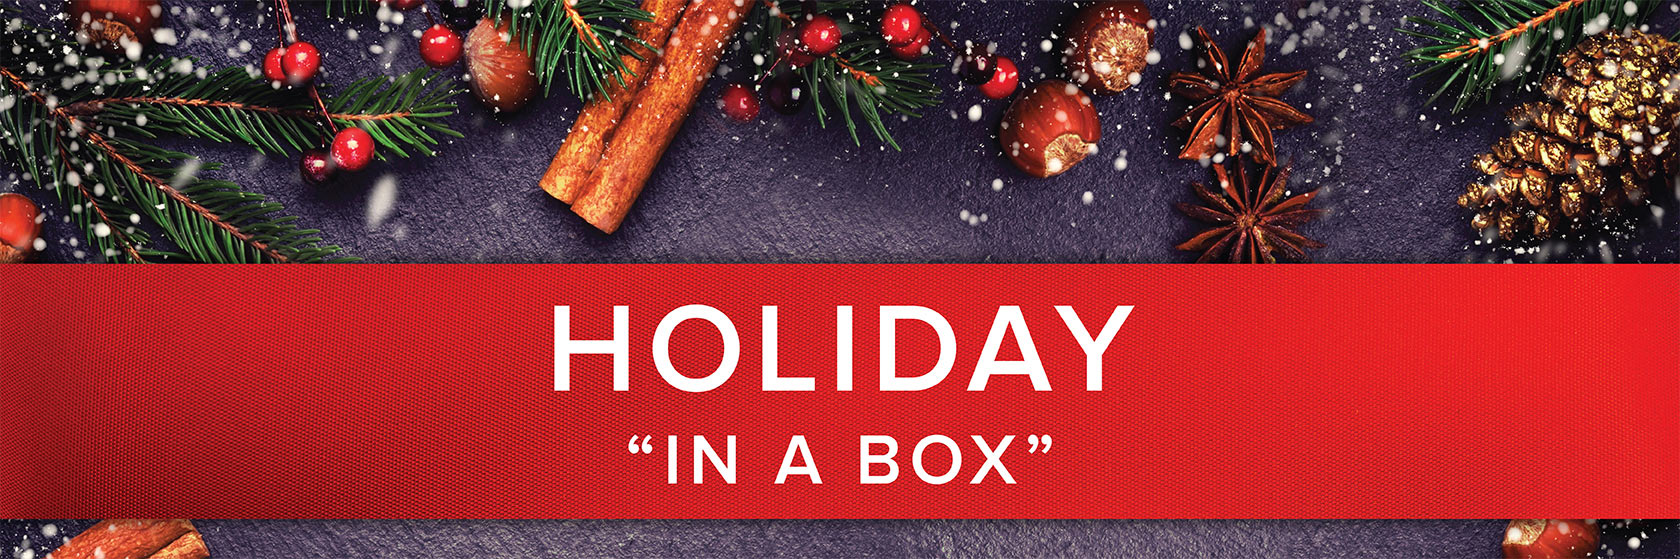 Holiday “In a Box” Request